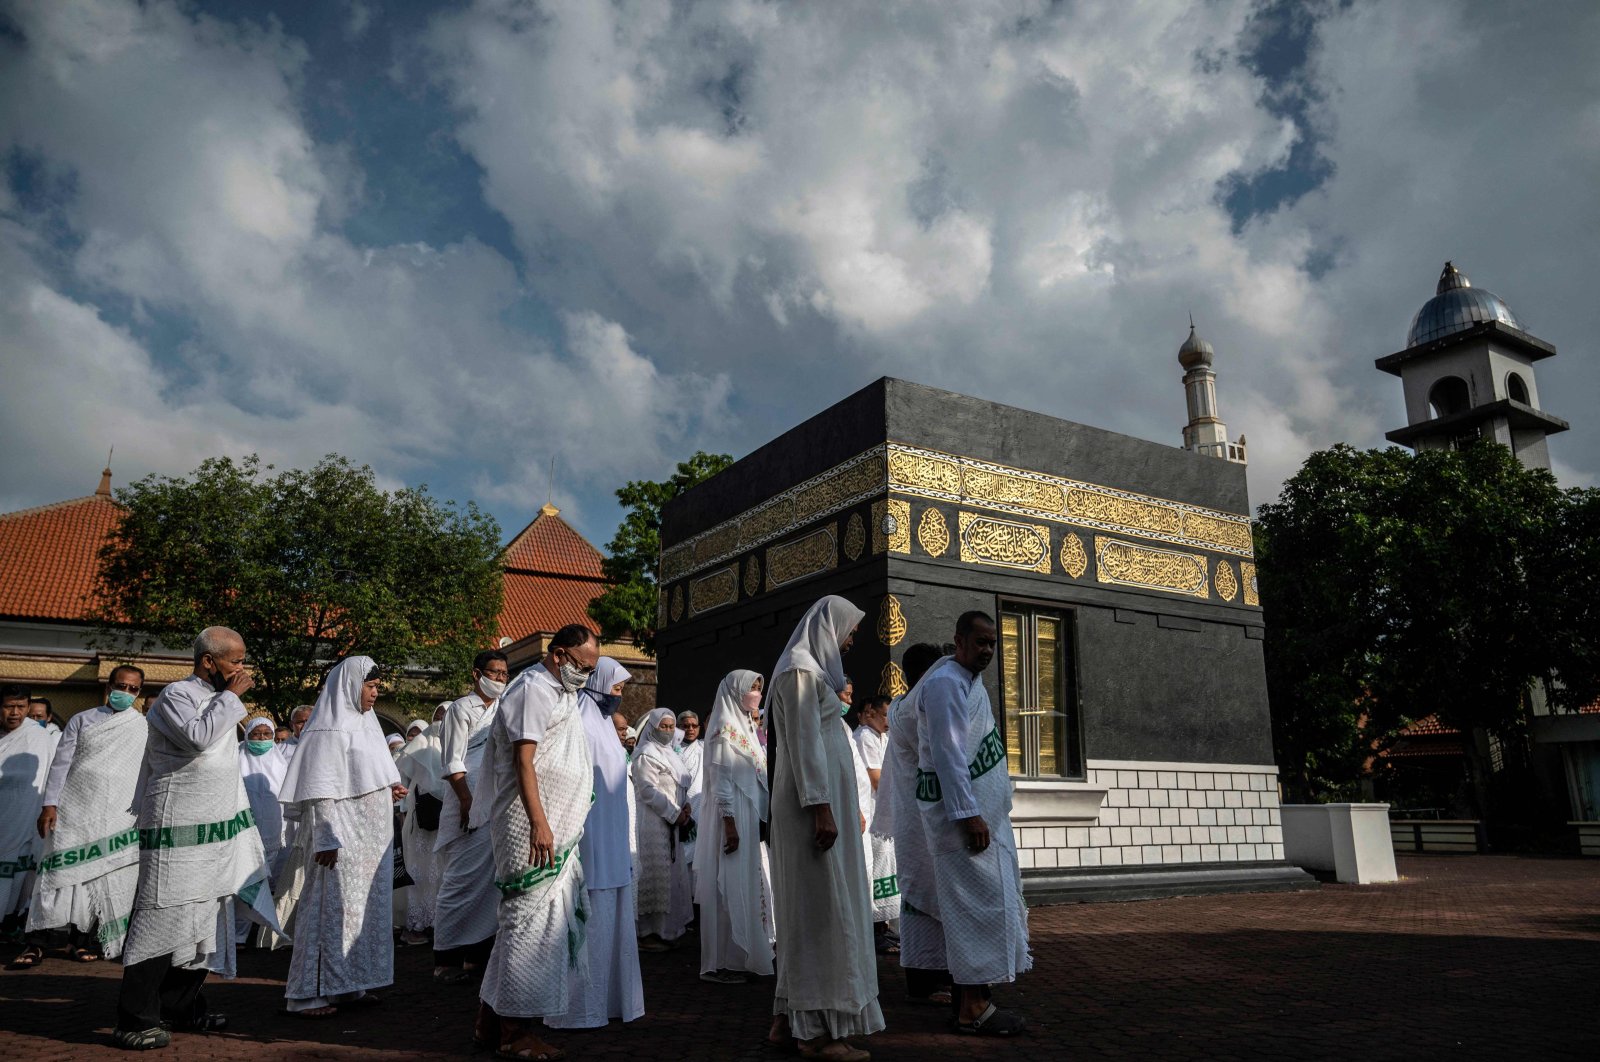 Indonesian Muslims simulate the circumambulation of a mock Kaaba as part of preparations ahead of their Hajj pilgrimage, one of the five pillars of Islam and undertaken by all Muslims who have the means at least once in their lives, Surabaya, Indonesia, May 22, 2022. (AFP Photo)